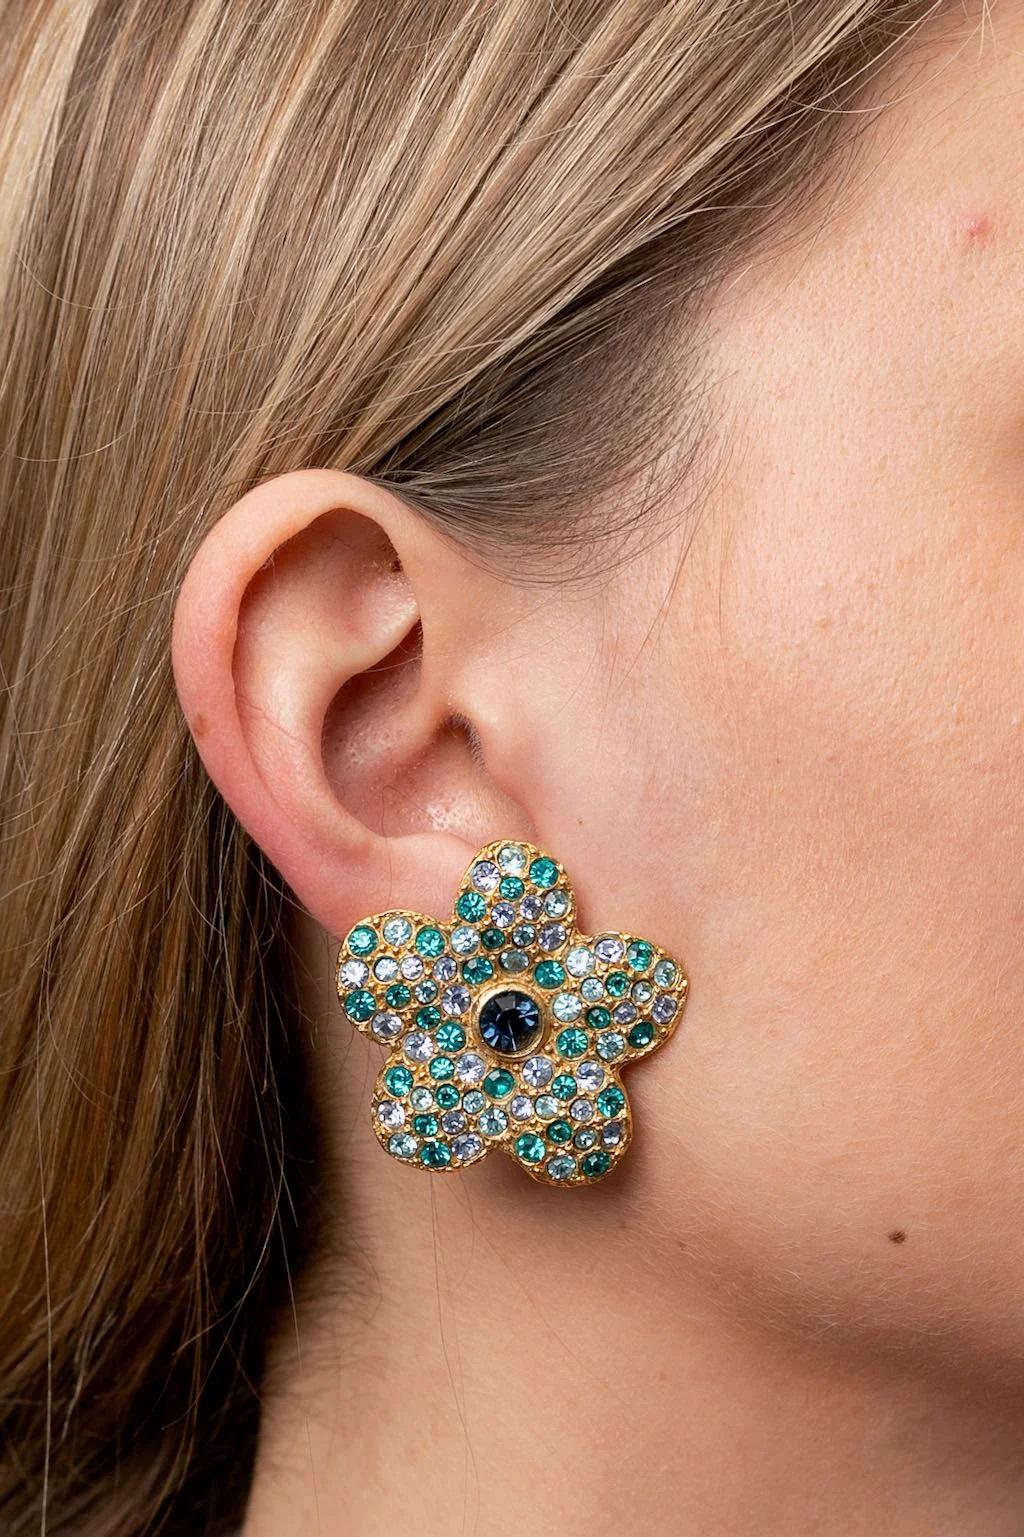 Yves Saint Laurent (Made in France) Gilted metal clip-on earrings paved with green and blue rhinestones.

Additional information:
Dimensions: 4 W x 4 H cm (1.57